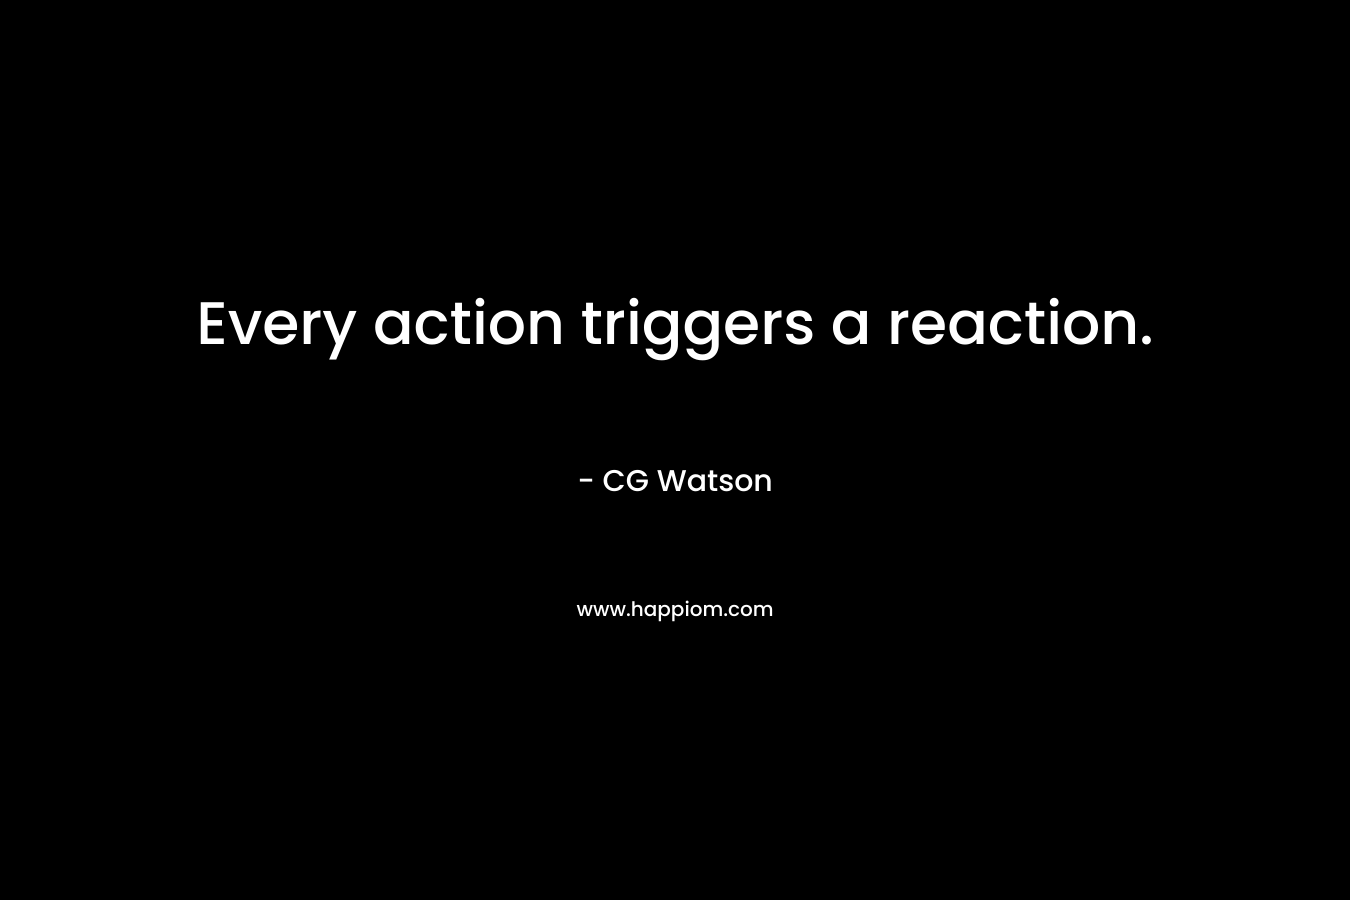 Every action triggers a reaction. – CG Watson